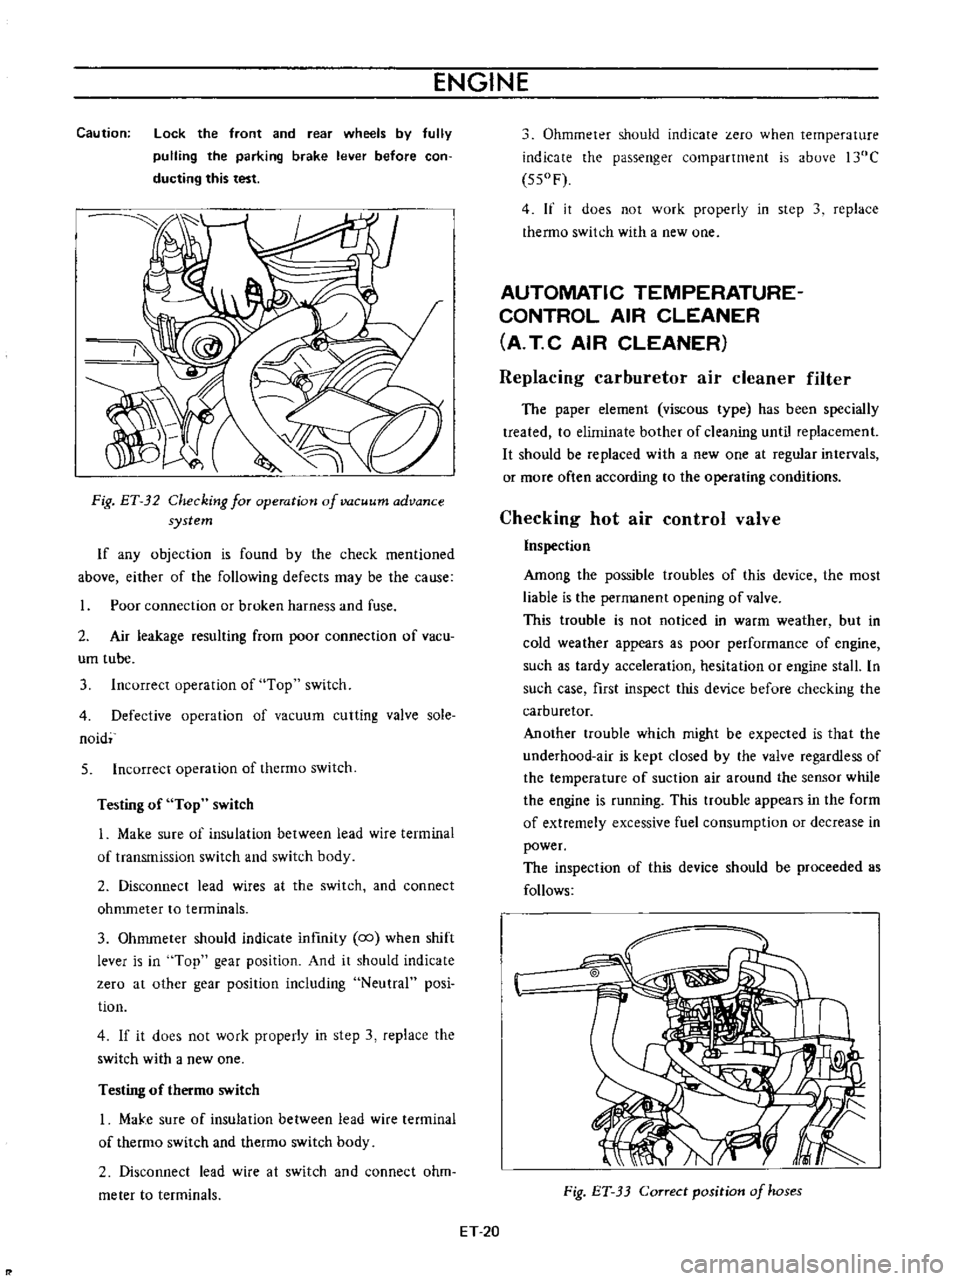 DATSUN B110 1973  Service Repair Manual 
ENGINE

Caution

lock 
the 
front

and 
rear 
wheels

by 
fully

pulling 
the

parking 
brake 
lever 
before 
con

ducting 
this 
test

Fig 
ET 
32

Checking 
for 
operation 
of 
vacuum

advance

sys